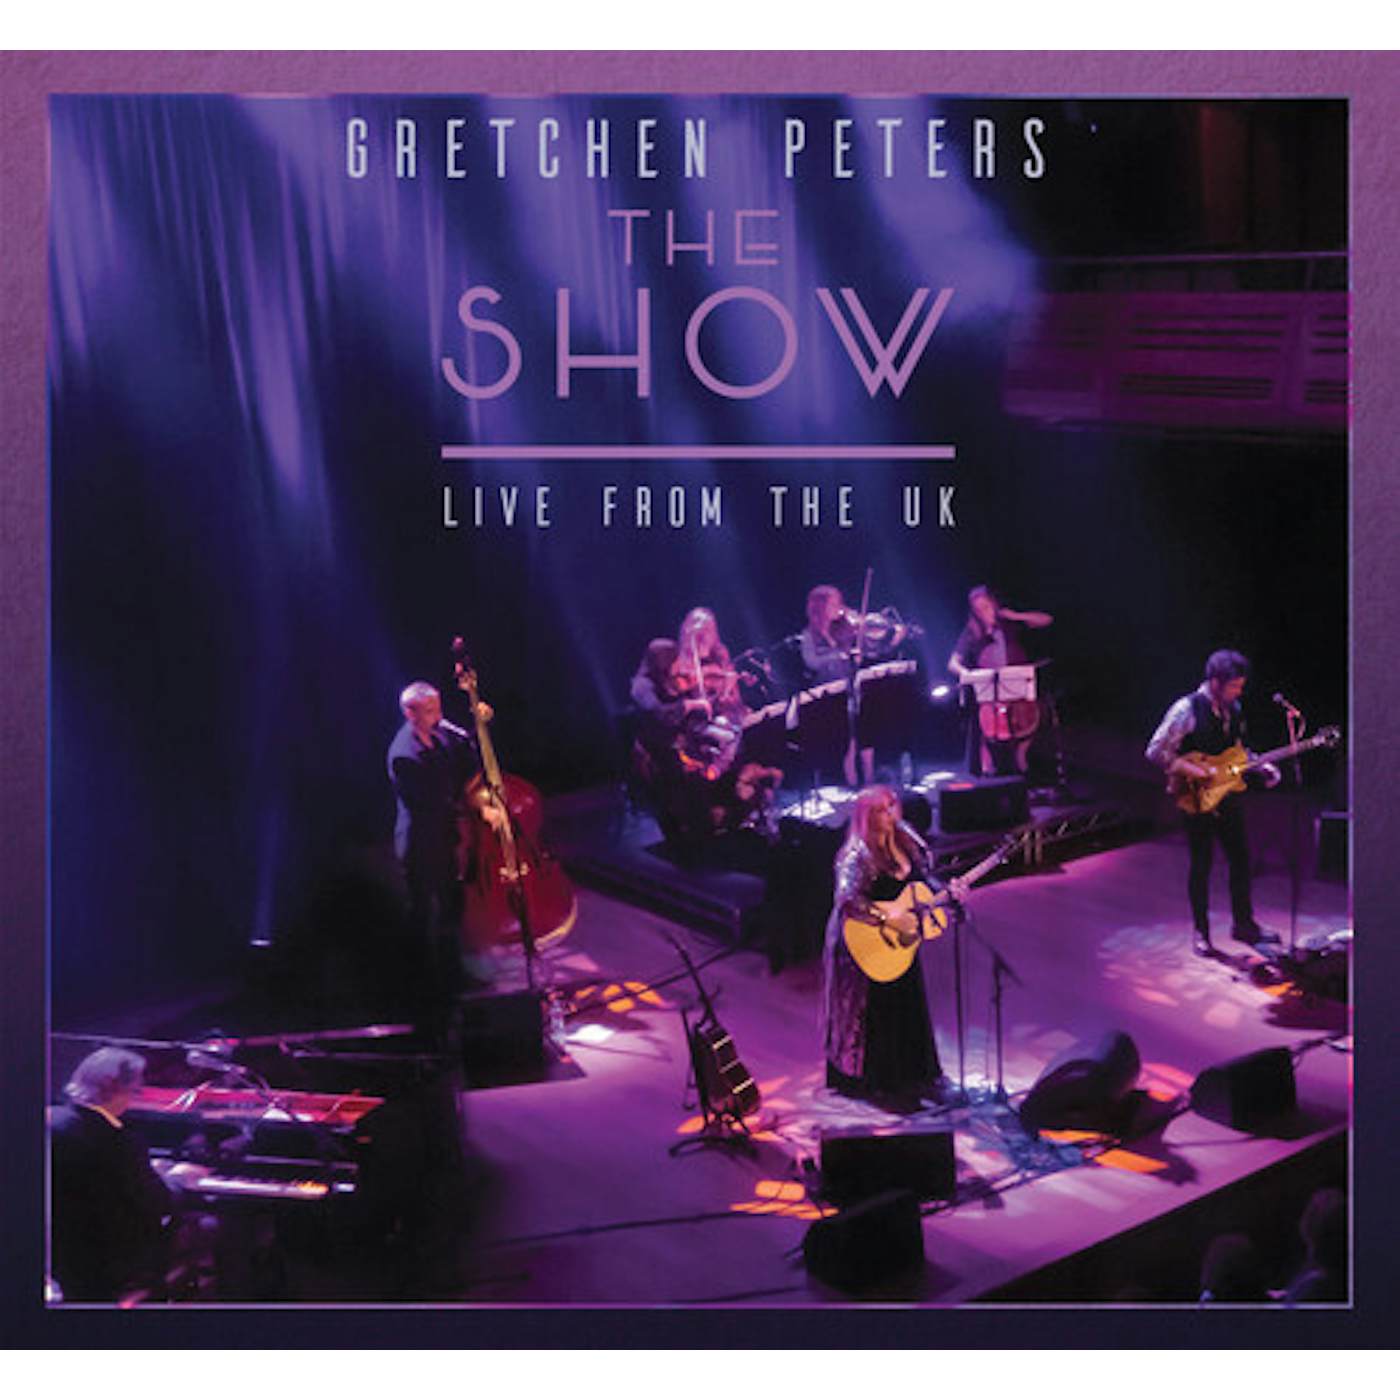 Gretchen Peters SHOW - LIVE FROM THE UK CD